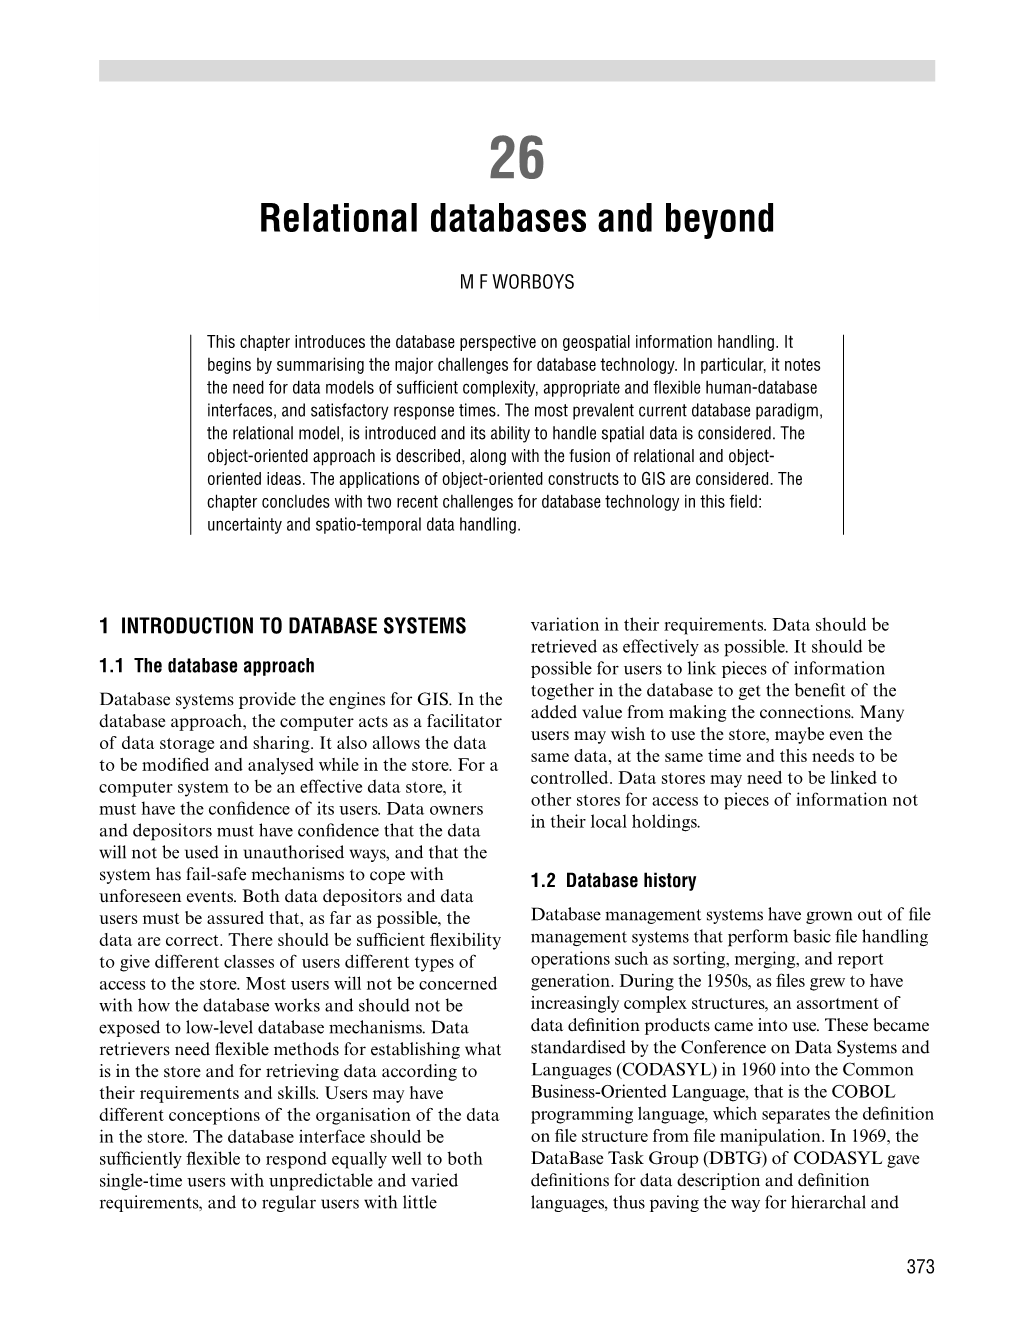 26. Relational Databases and Beyond